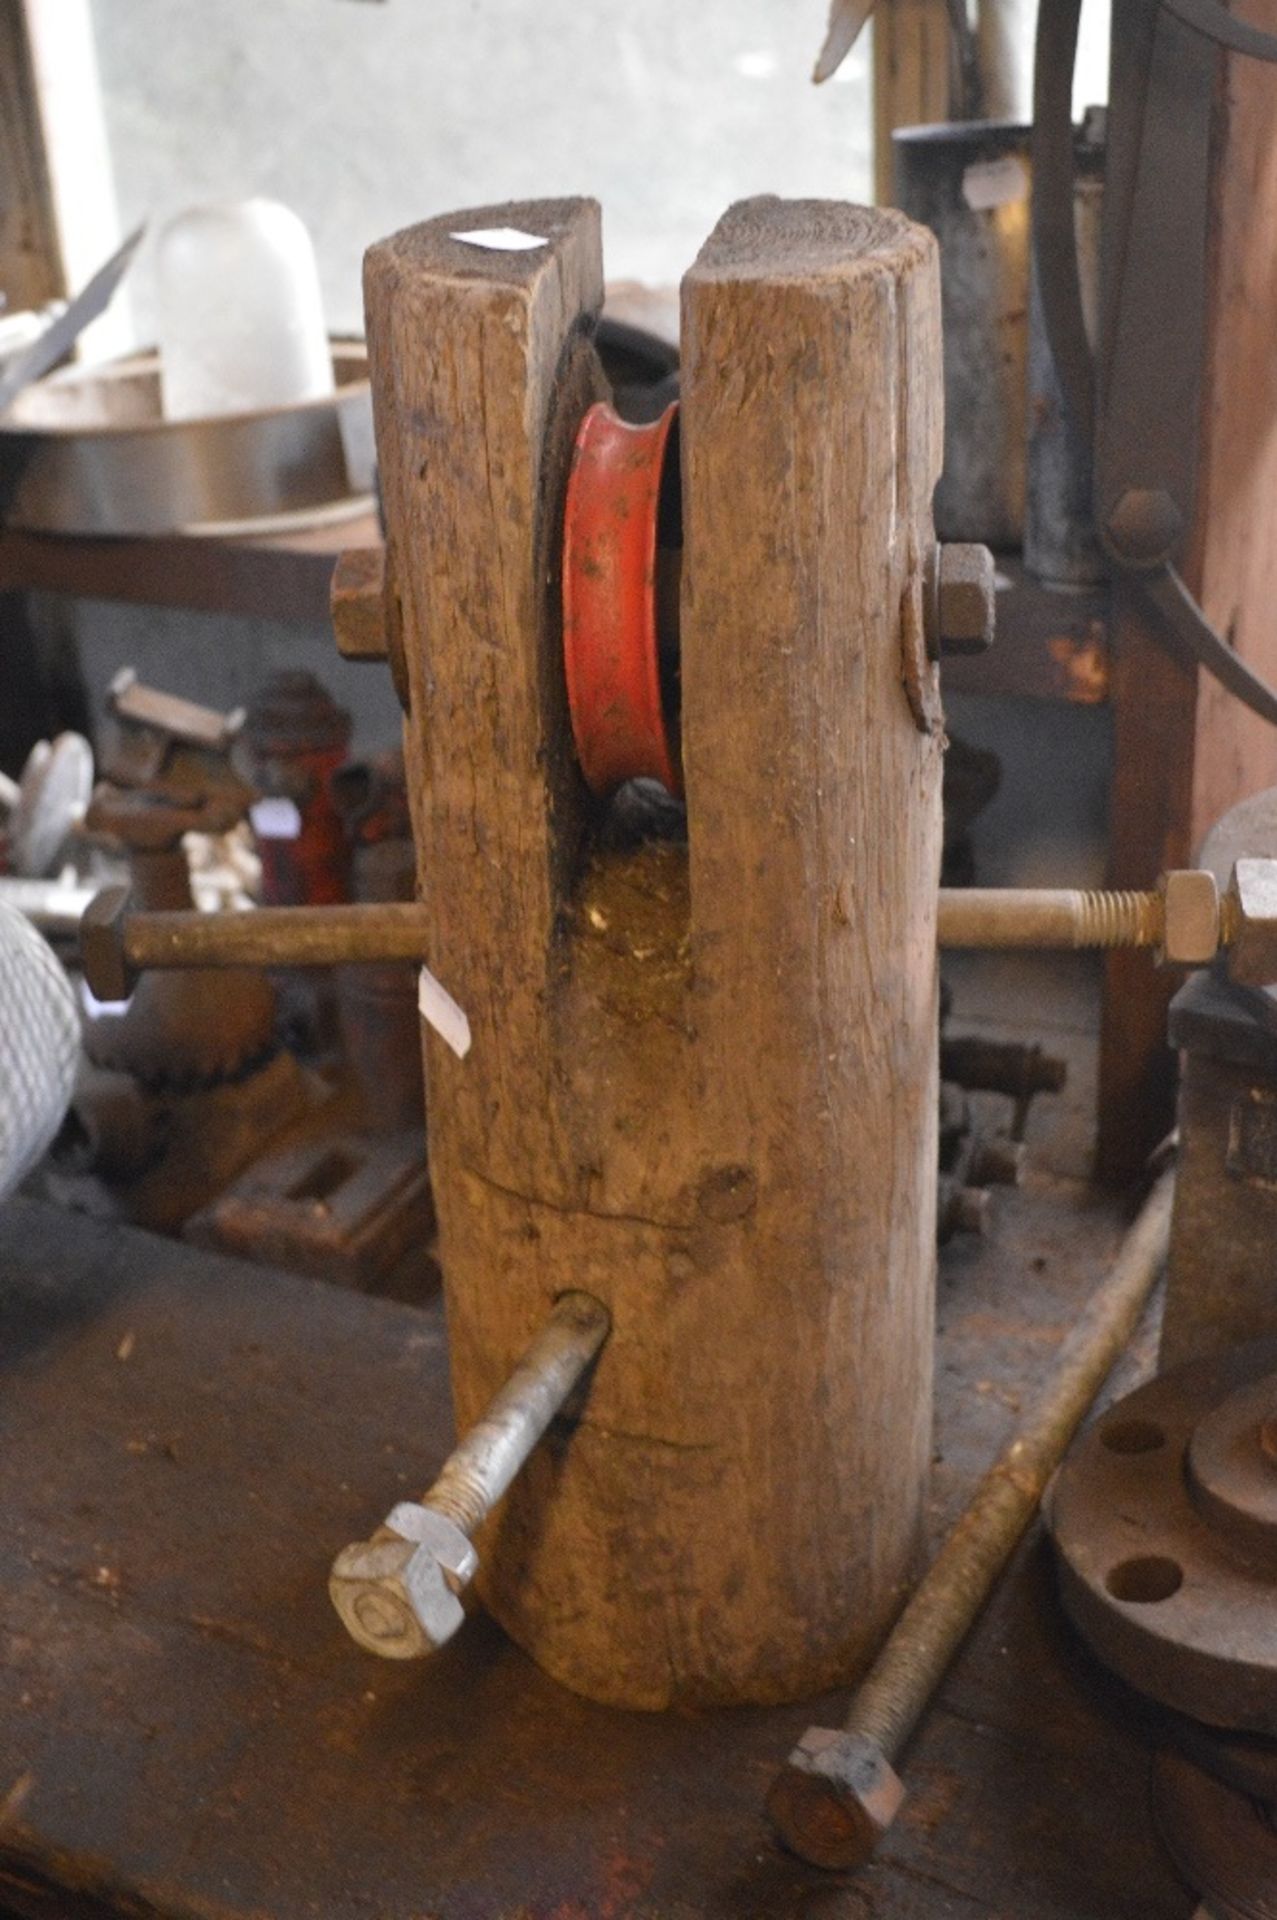 A device believed to have been invented by Dibnah for raising and lowering scaffolding from the top